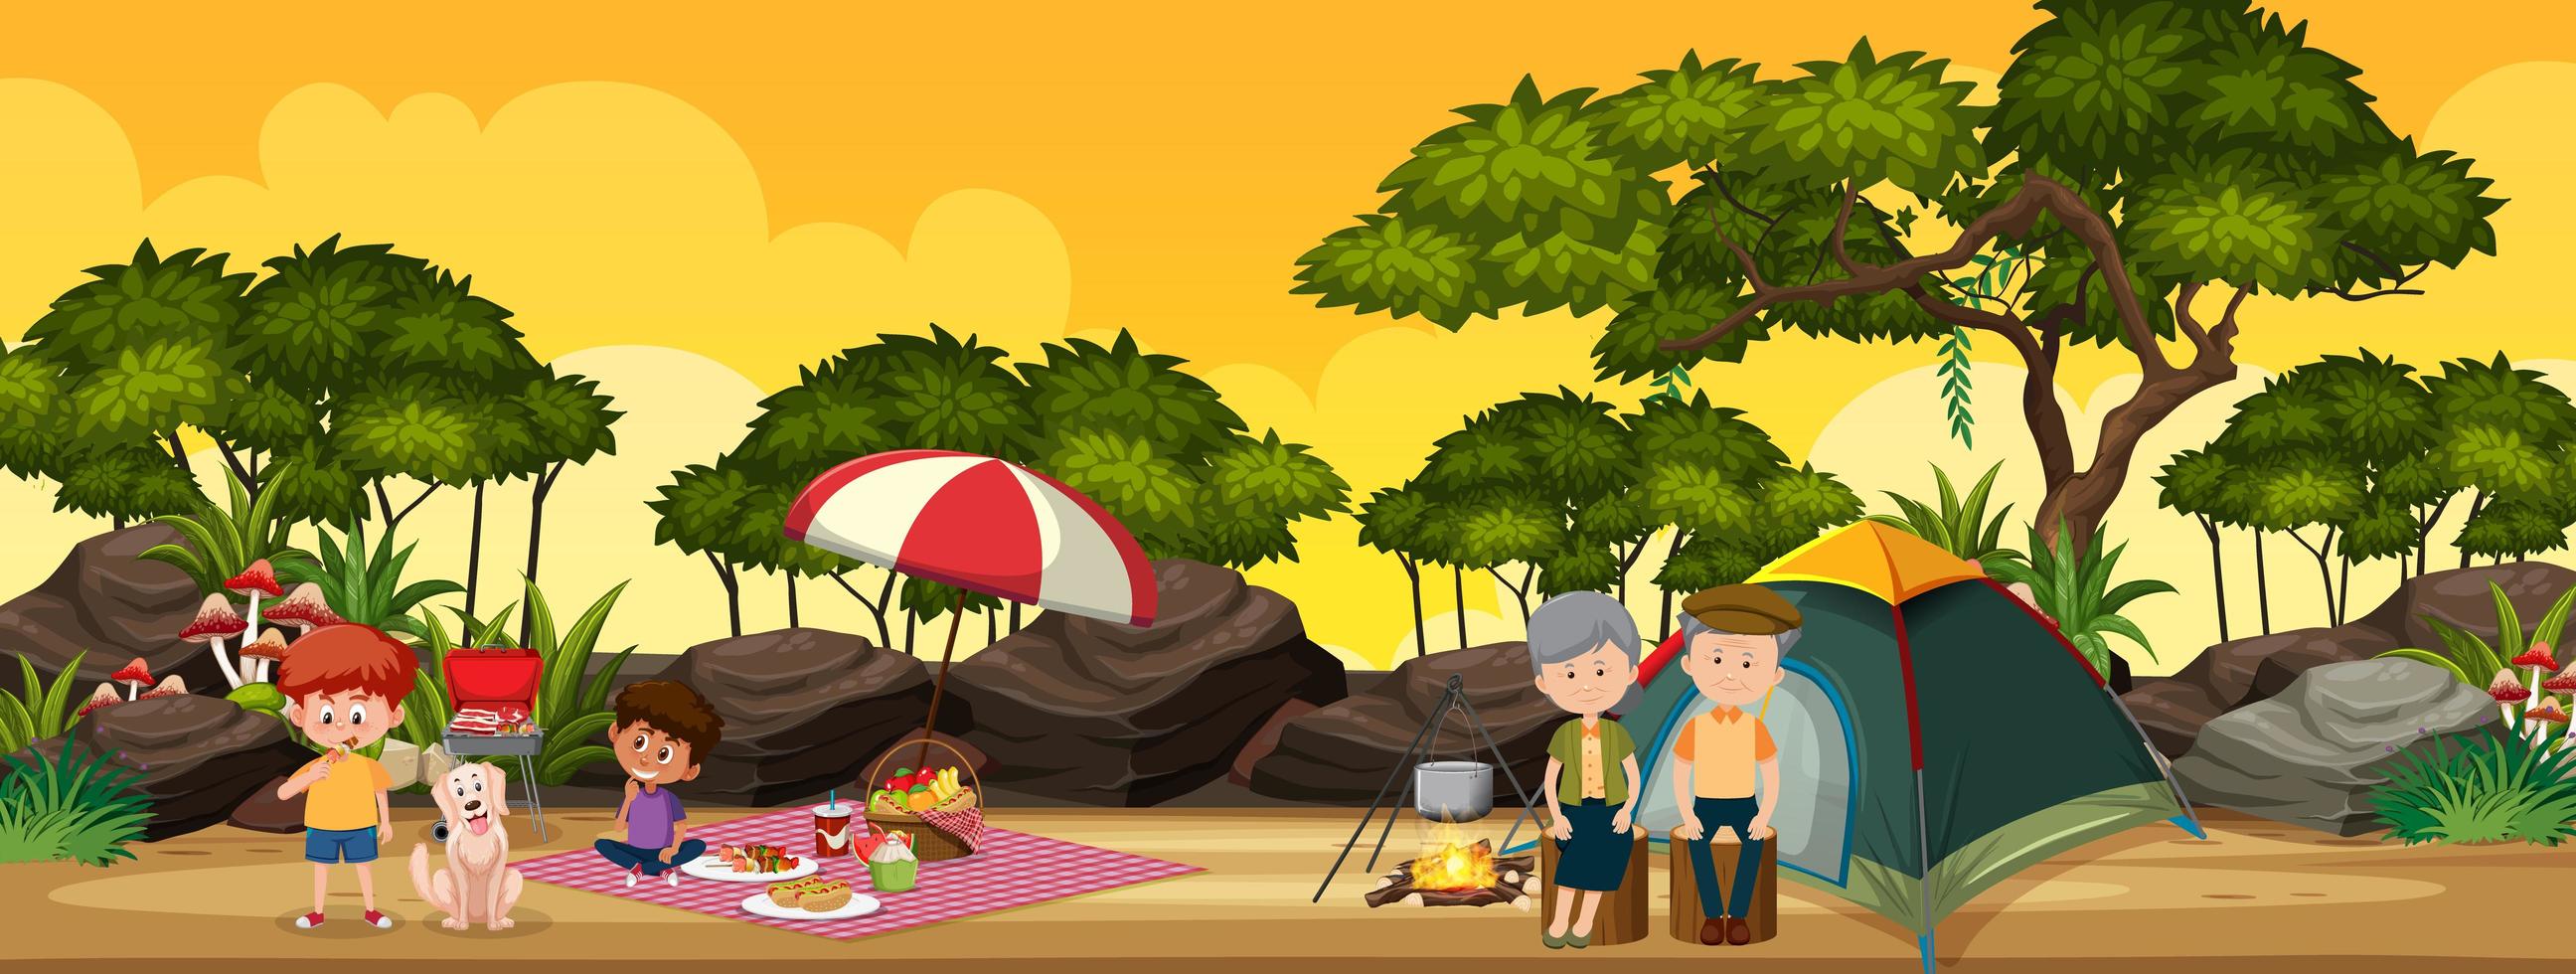 Family camping in the forest vector